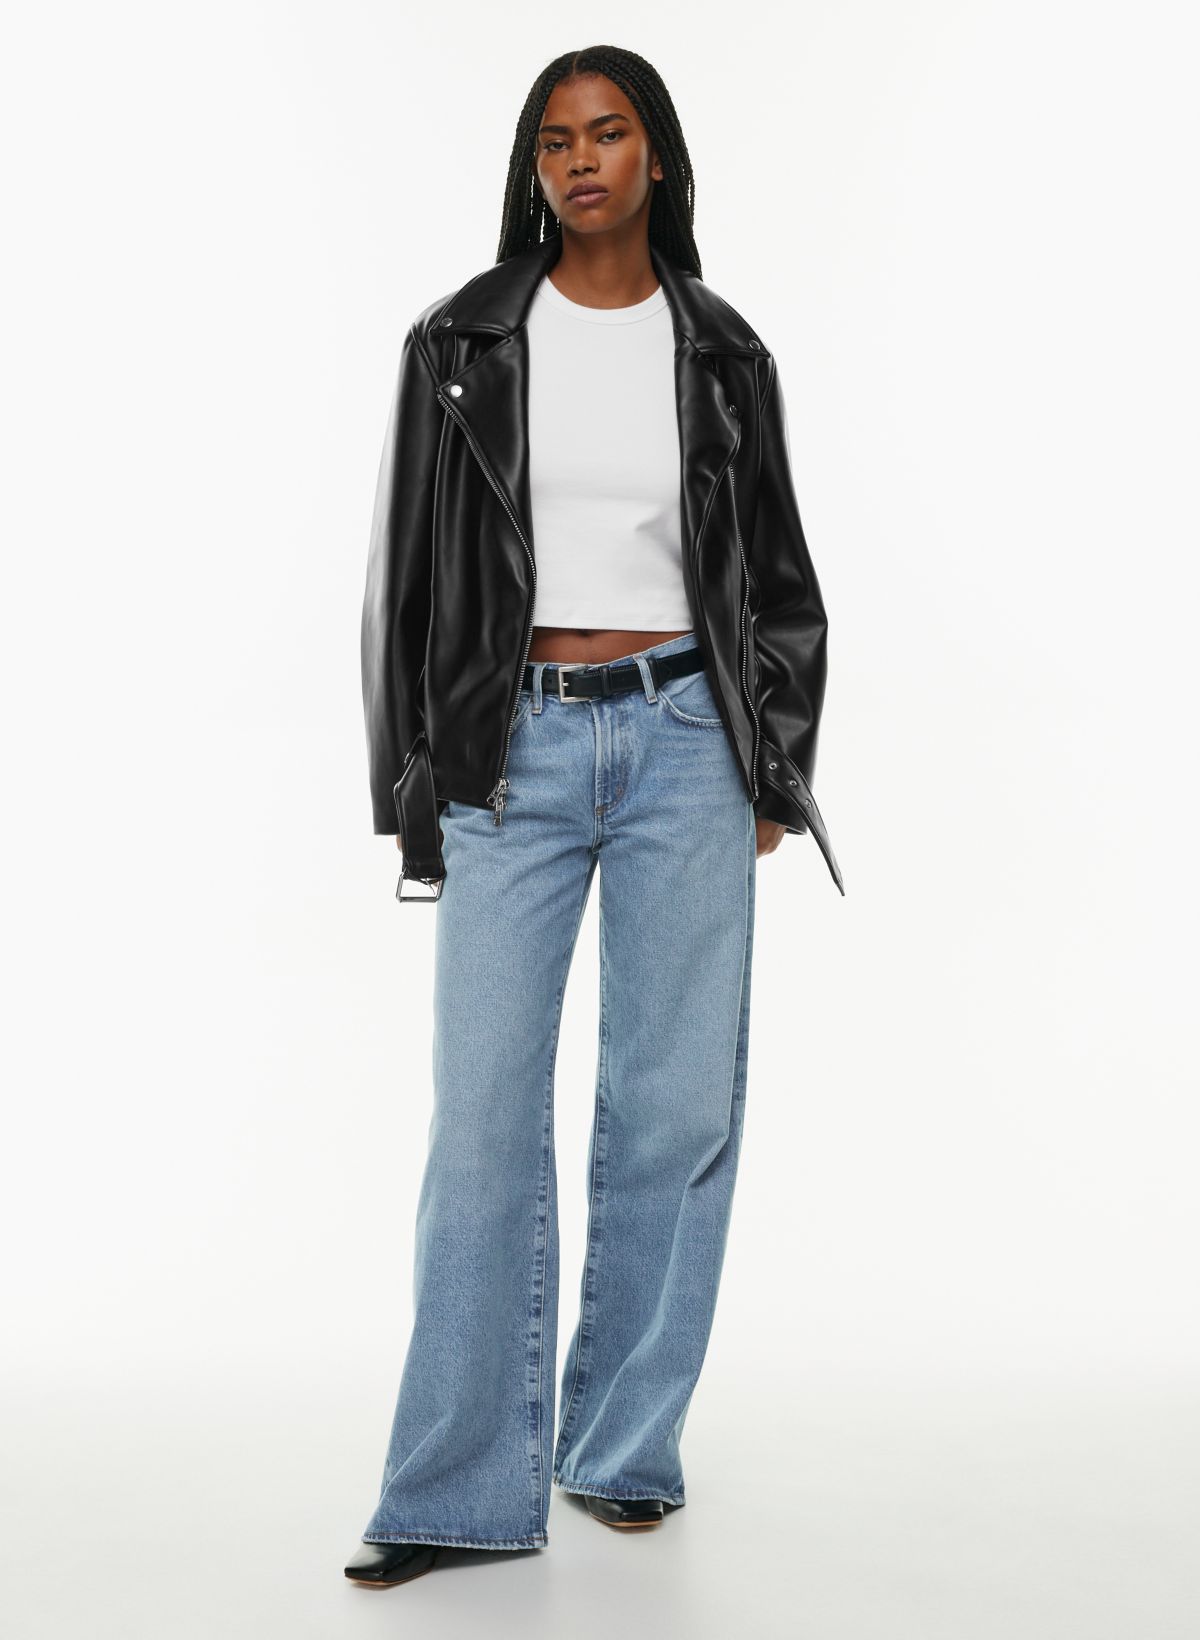 ASOS DESIGN flared jeans in black leather look